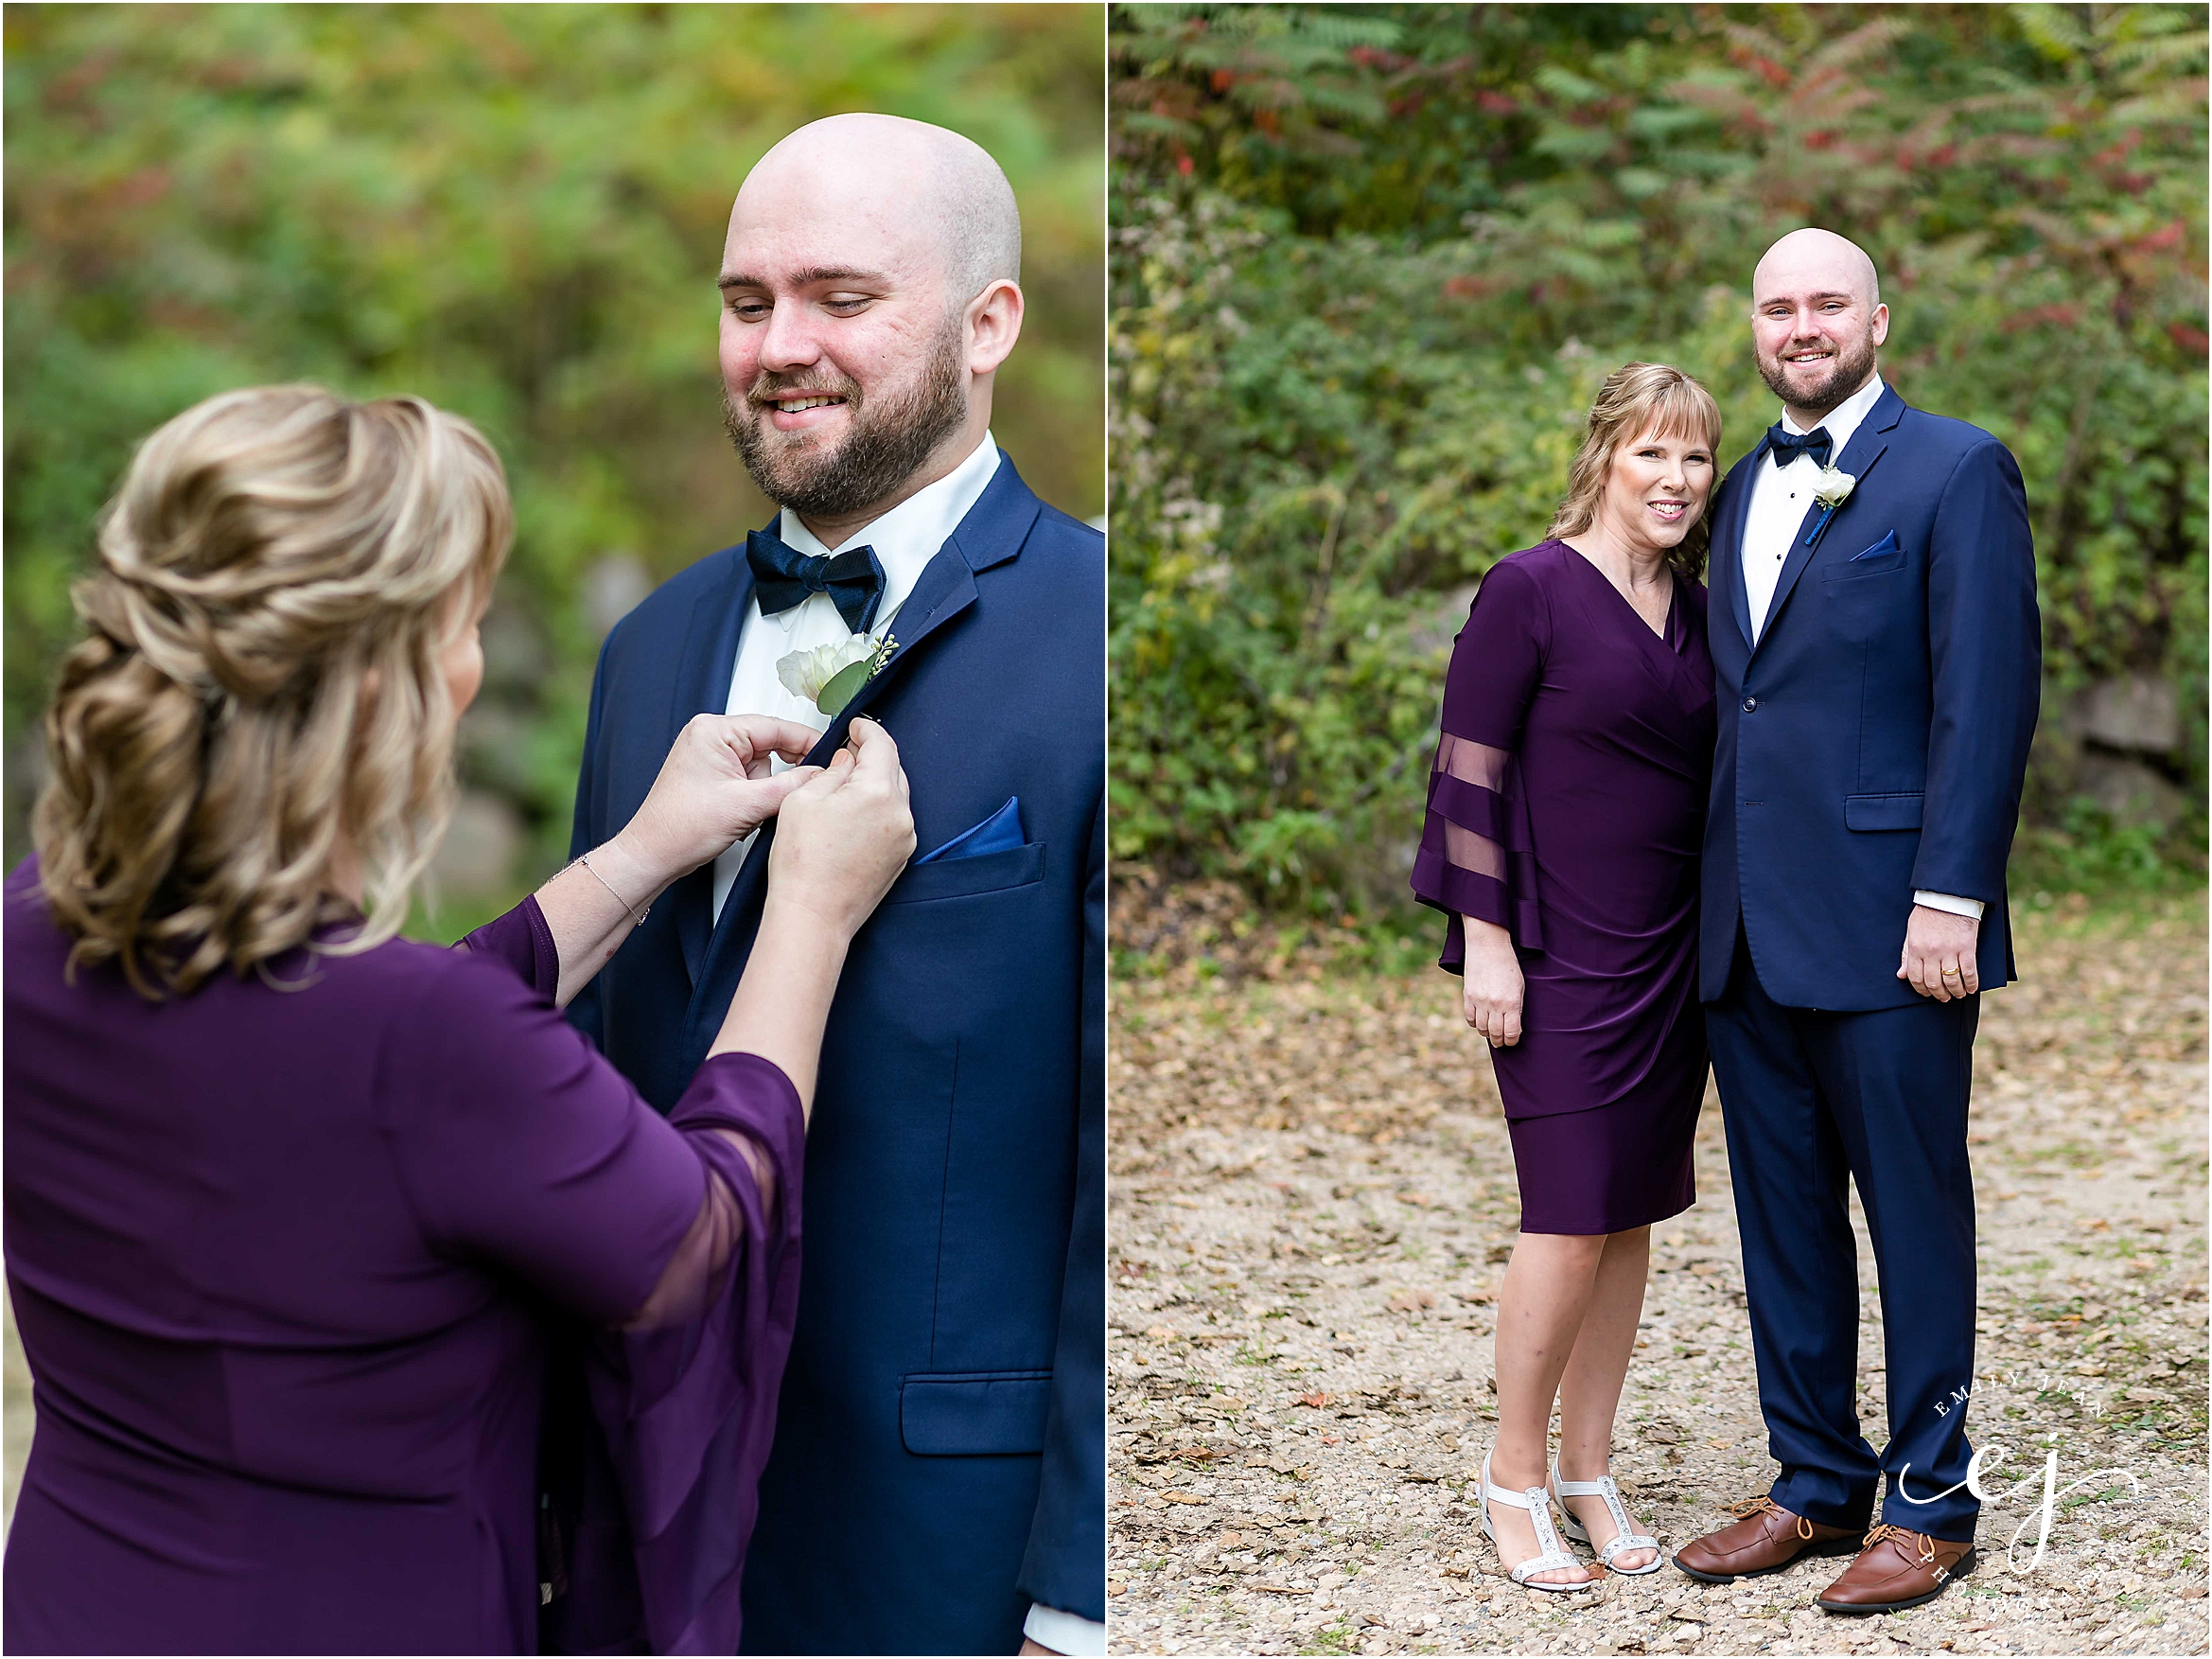 Mother of the groom wearing purple helping him put on his boutonniere at Edgewood farm